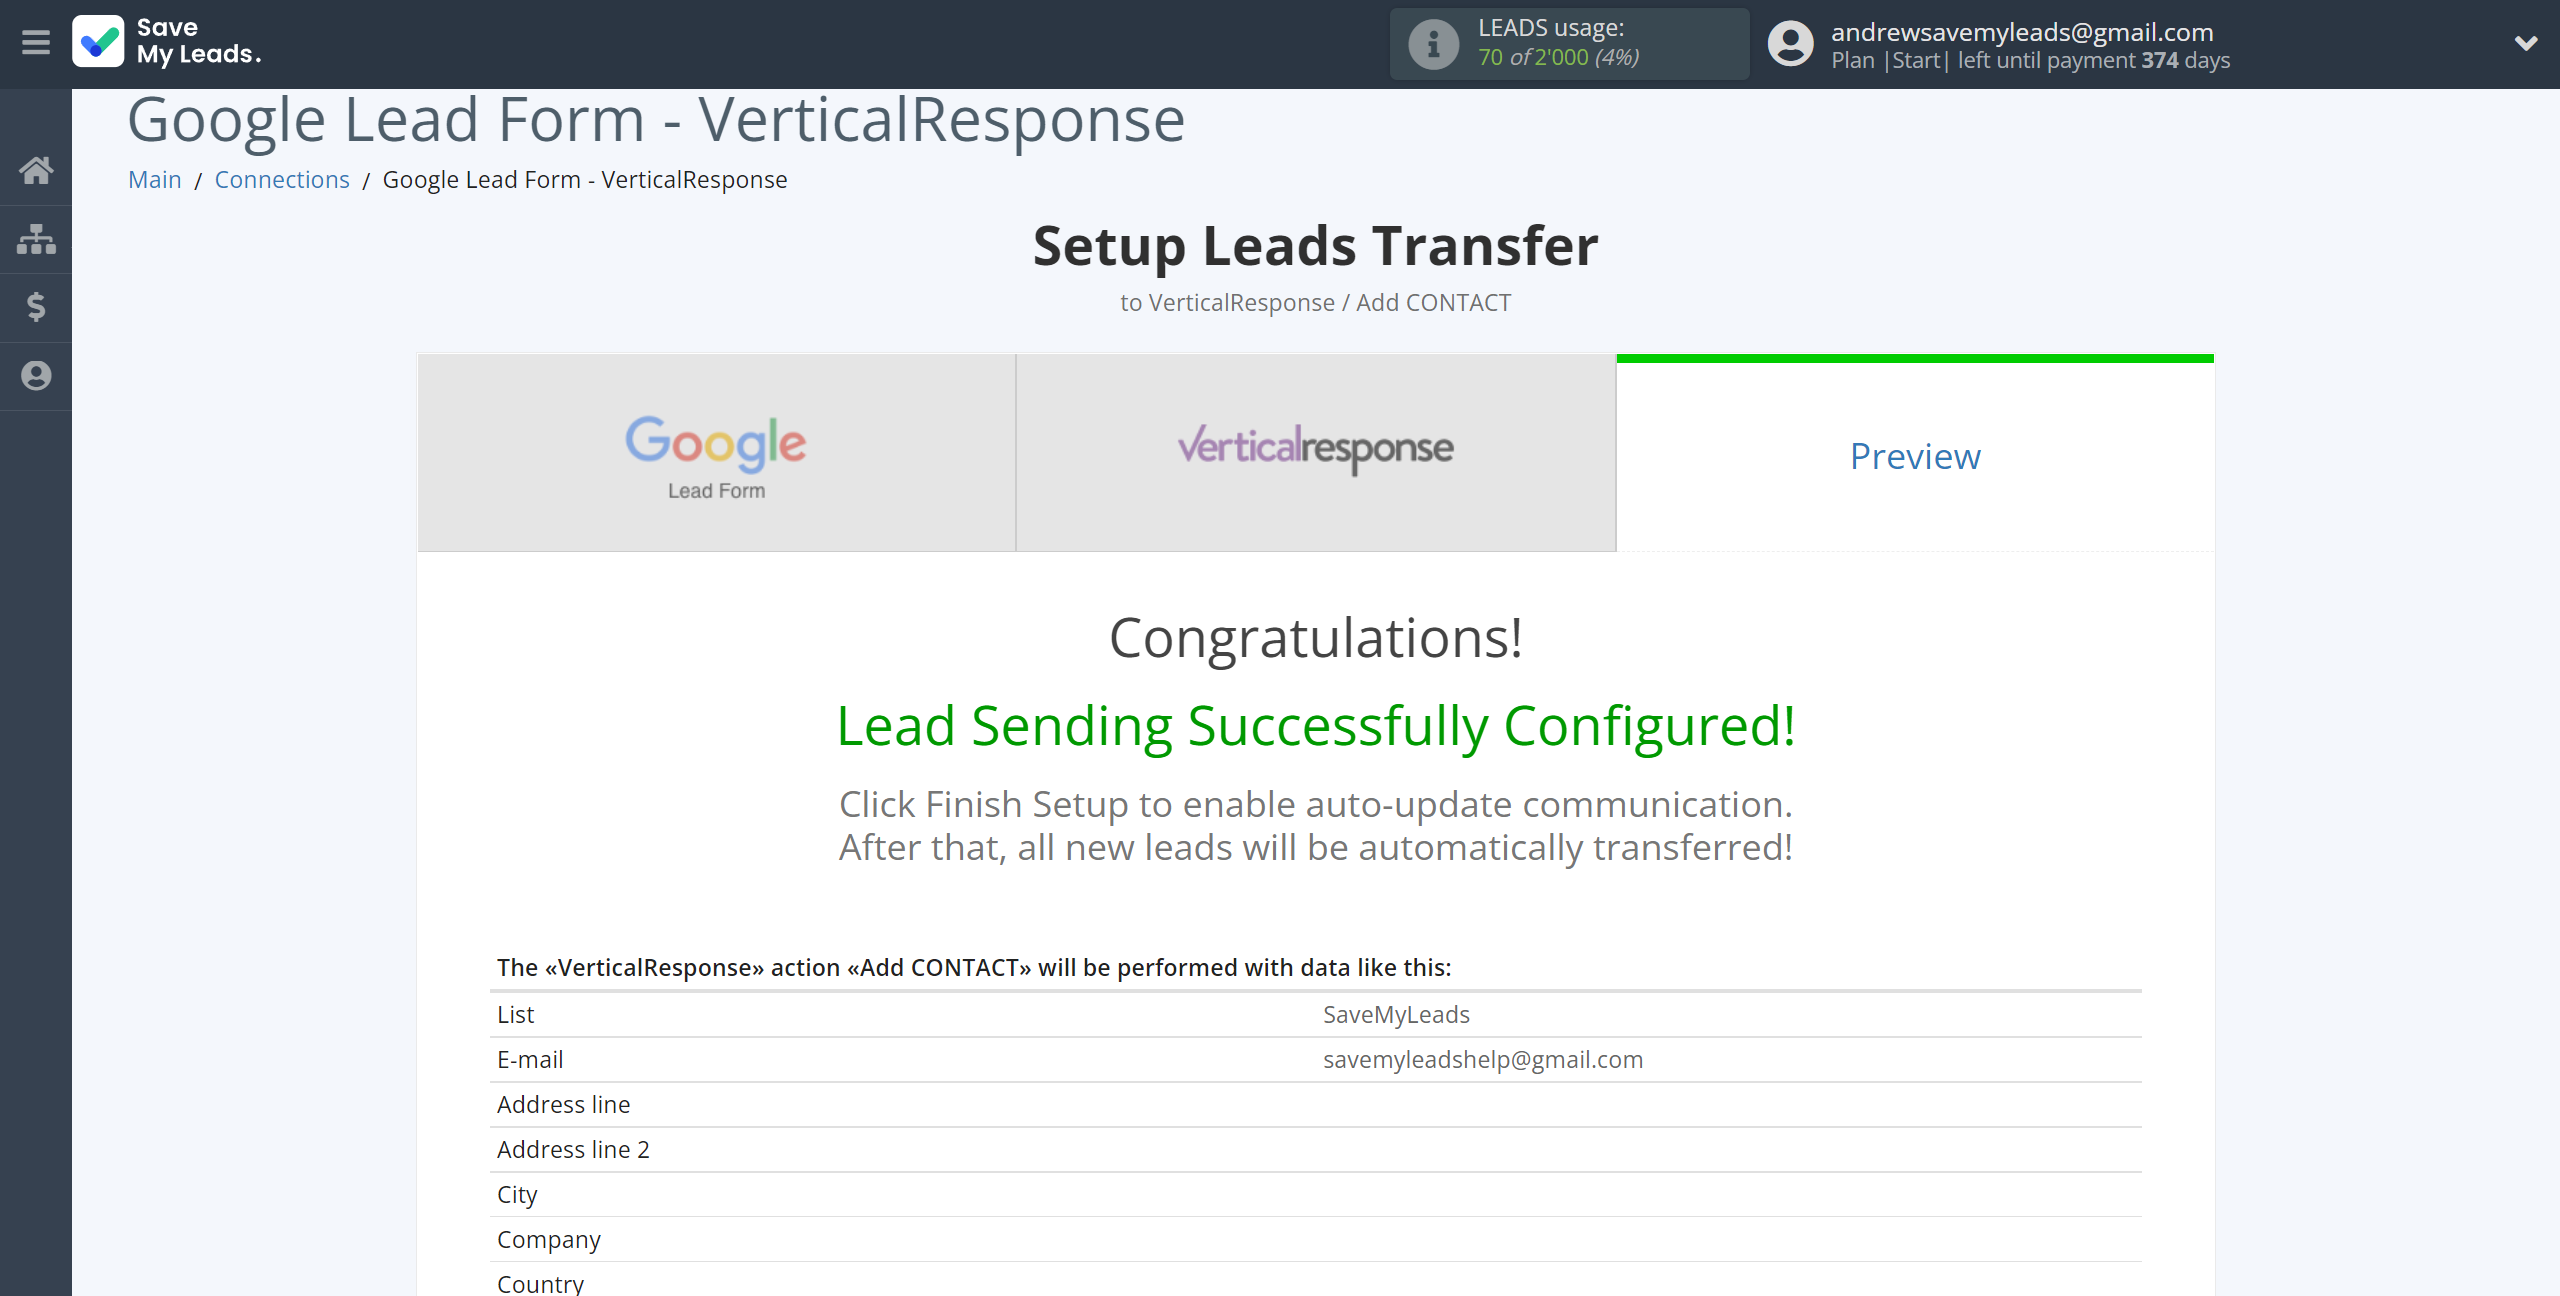 How to Connect Google Lead Form with VerticalResponse | Test data